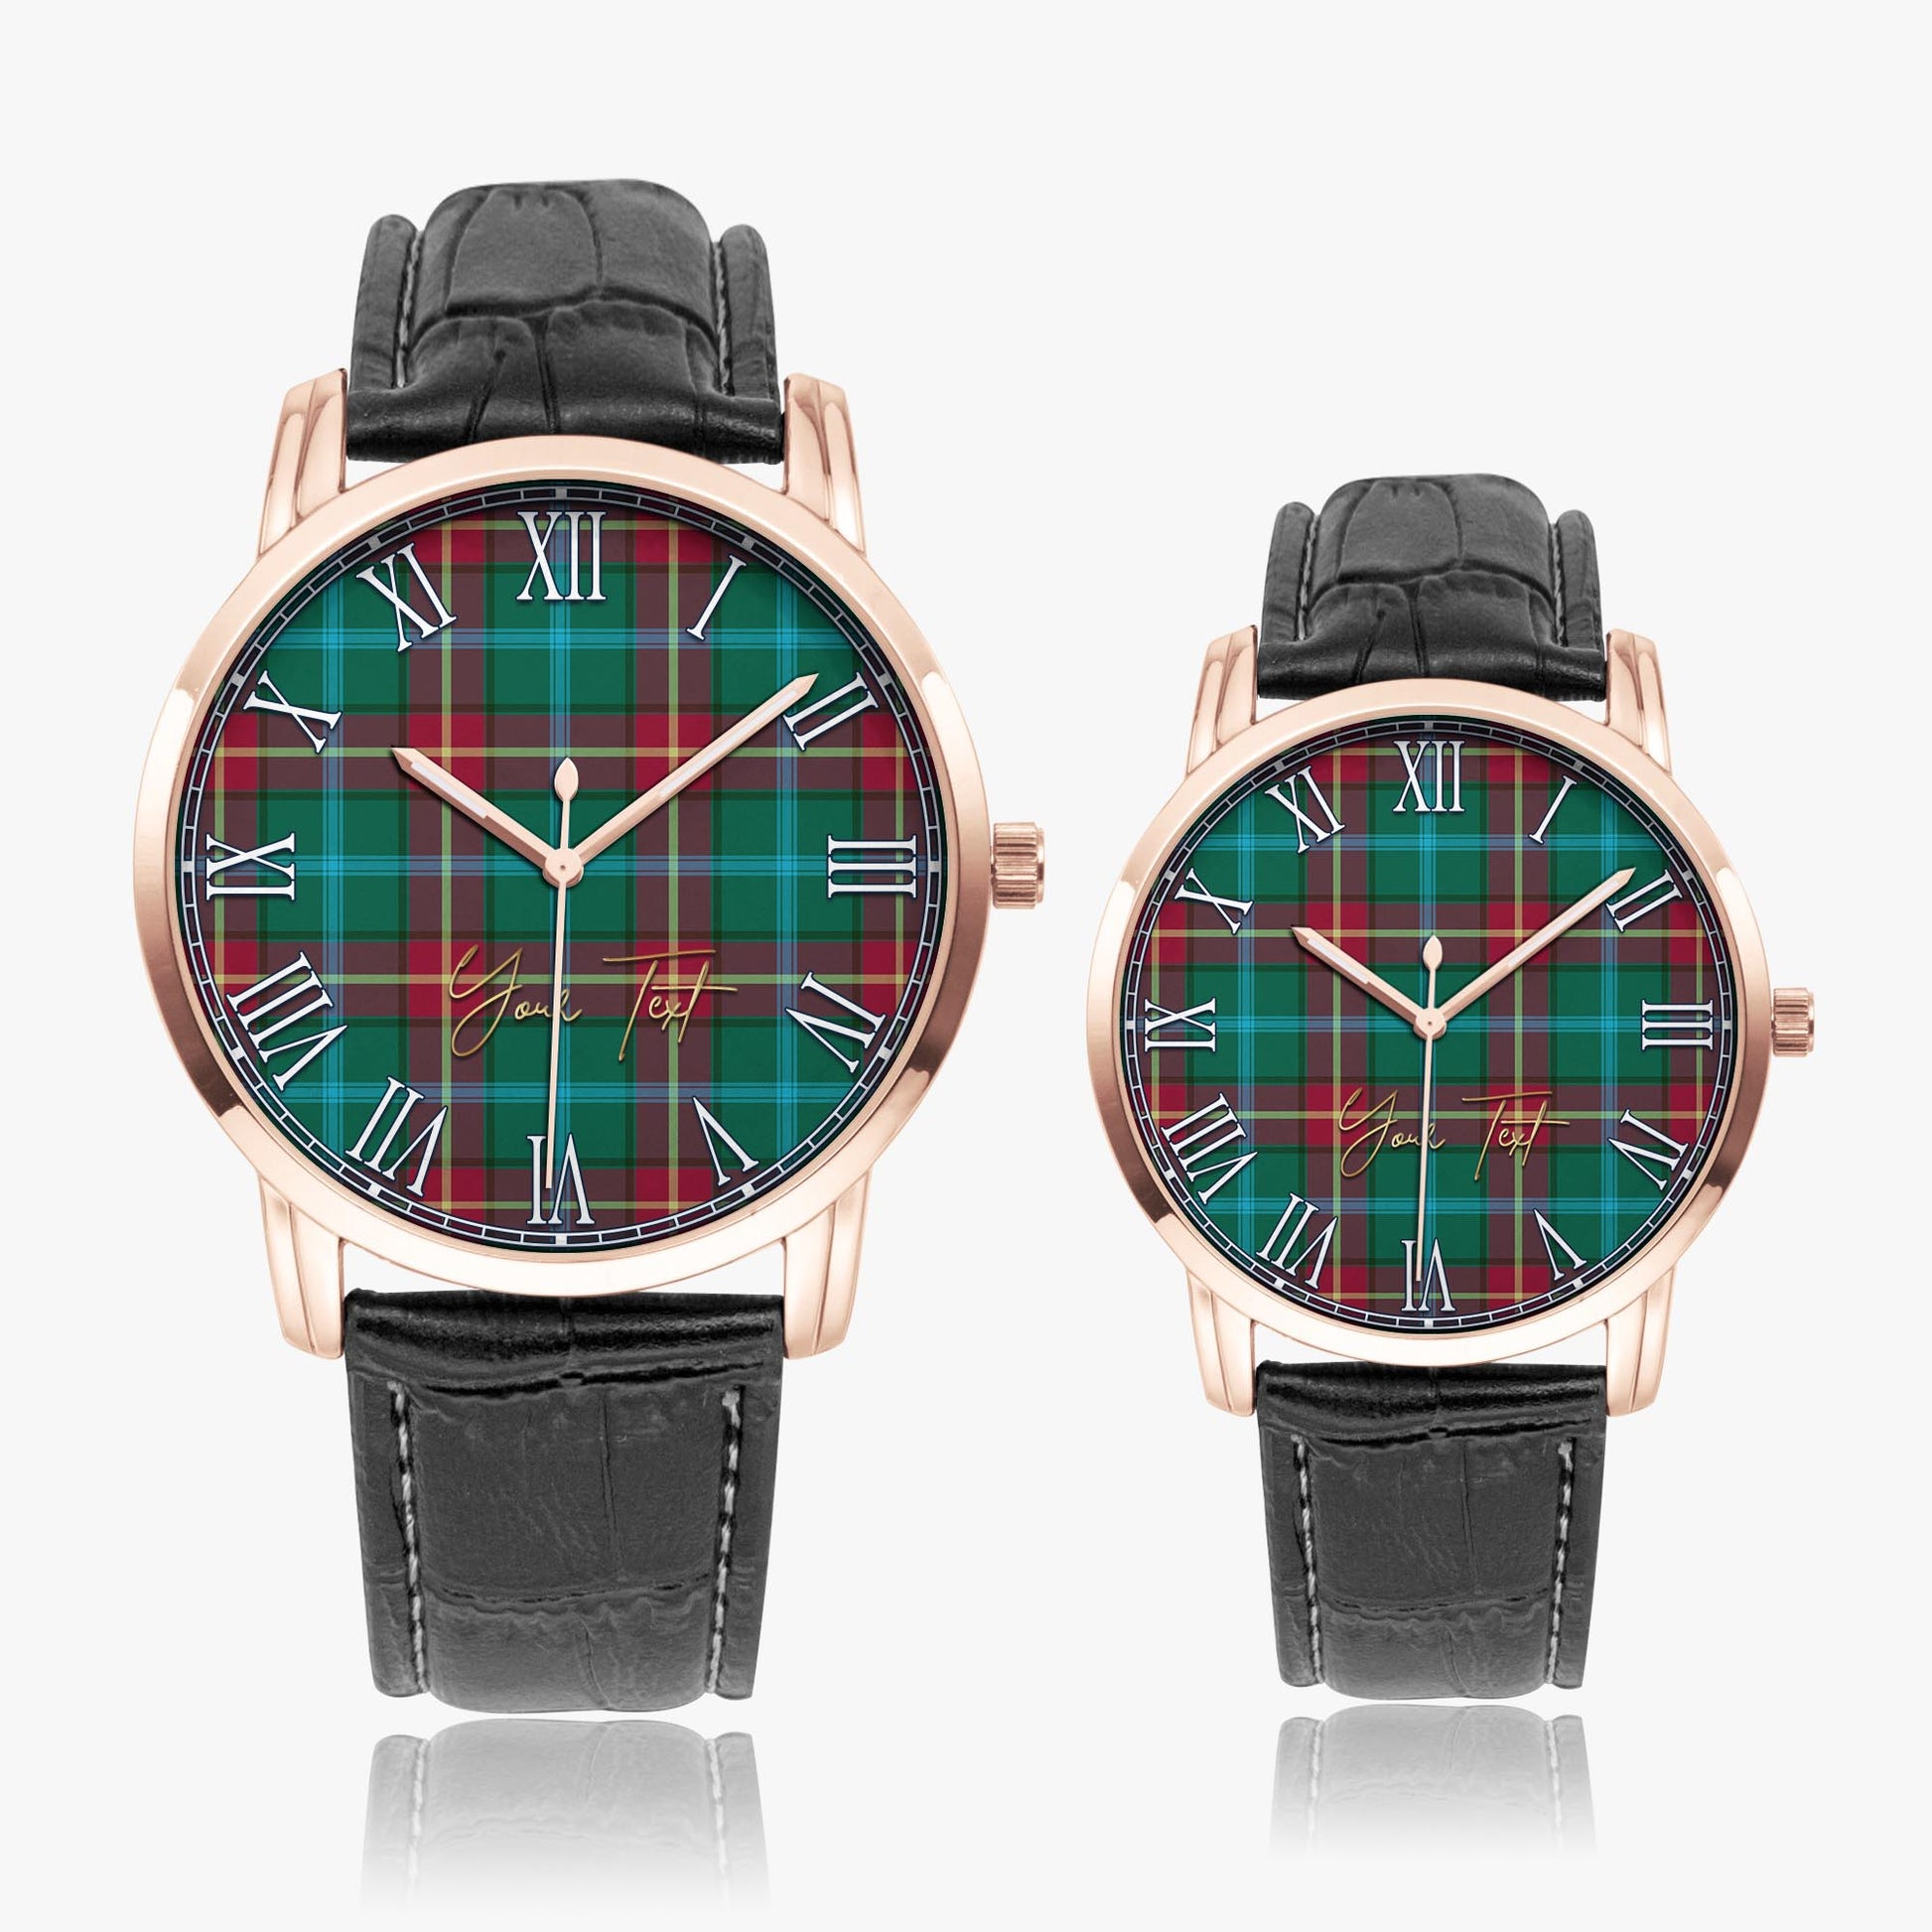 Manitoba Province Canada Tartan Personalized Your Text Leather Trap Quartz Watch Wide Type Rose Gold Case With Black Leather Strap - Tartanvibesclothing